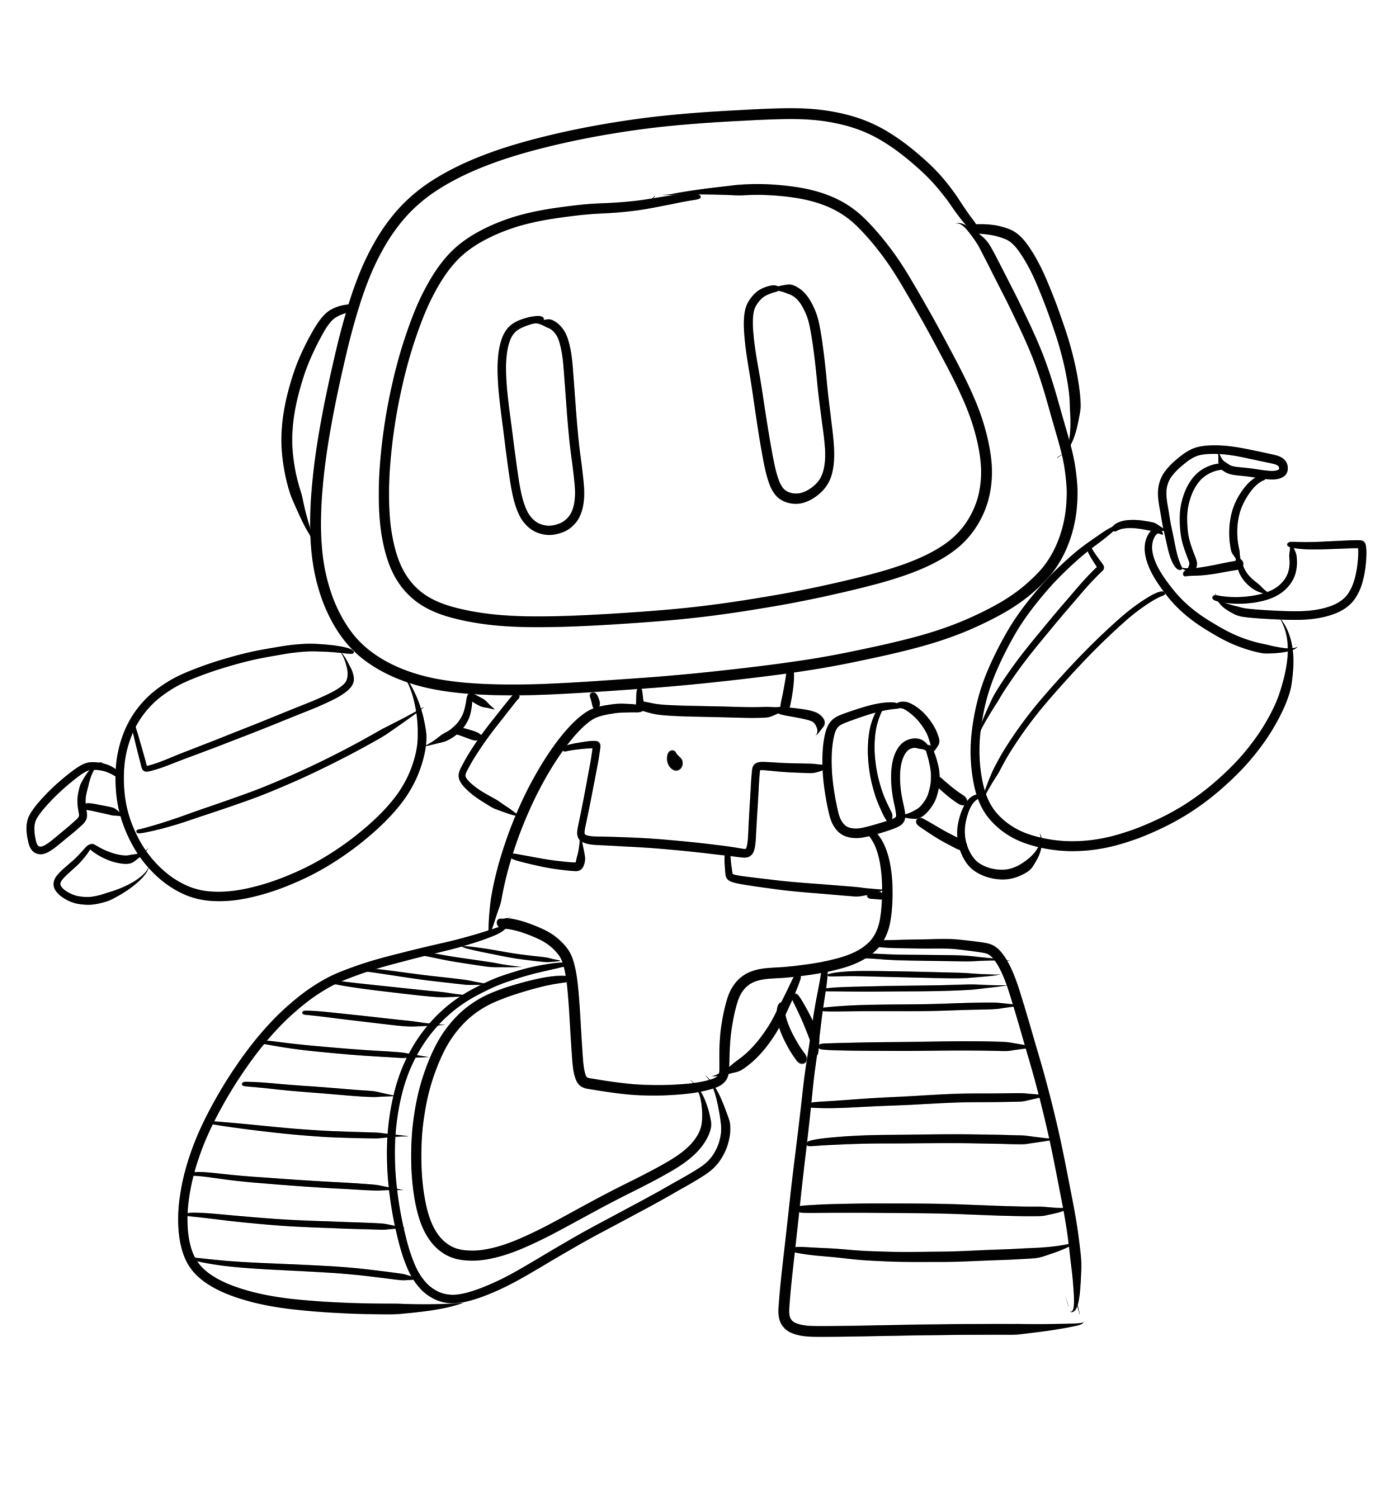 Boogie Bot from Poppy Playtime - Coloring Pages for kids